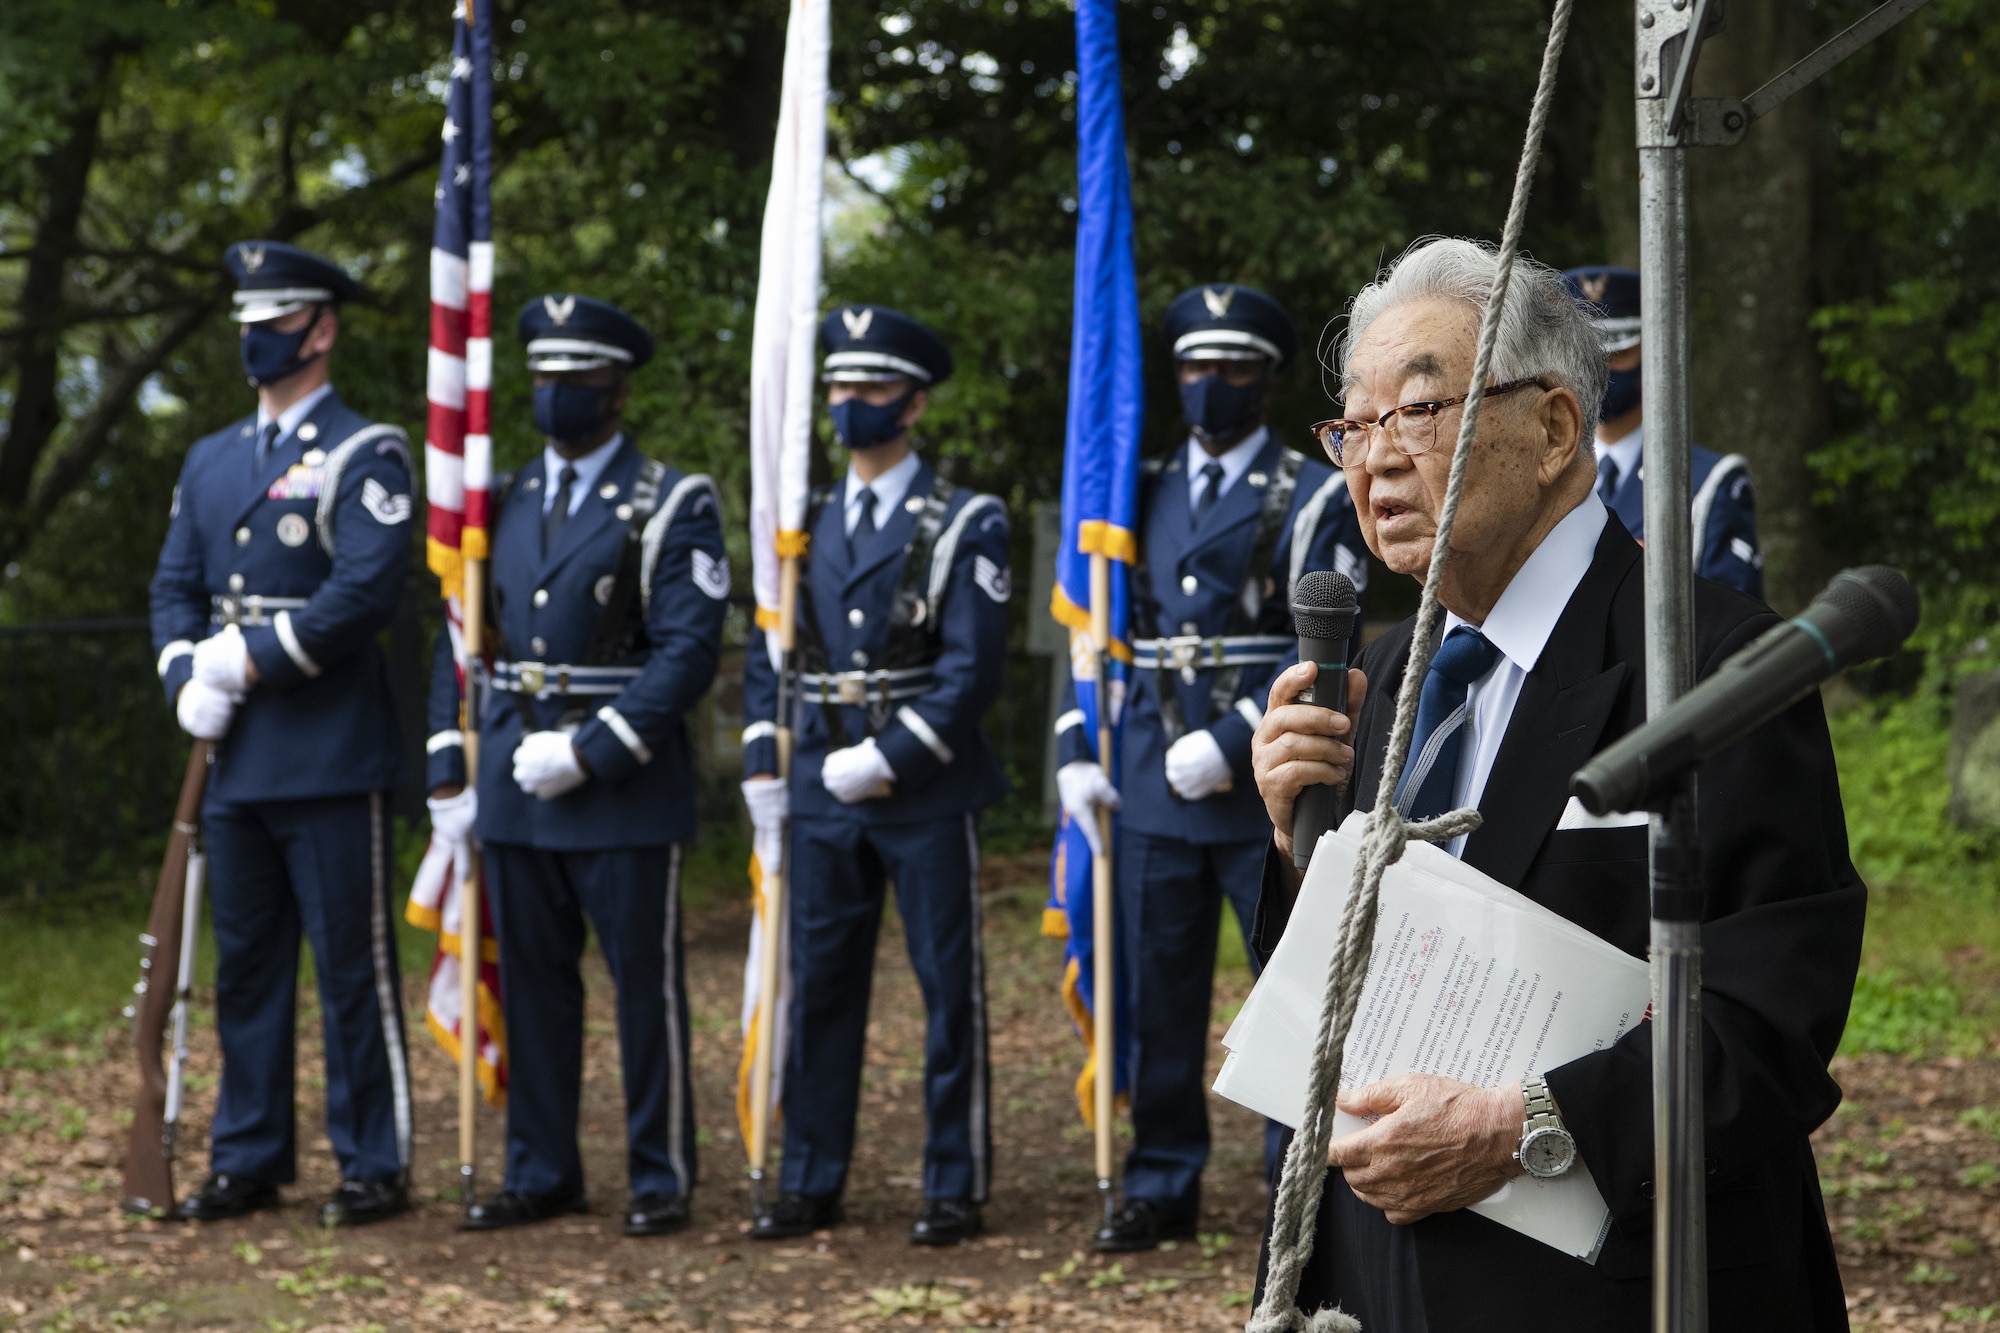 Dr. Hiroya Sugano, ceremony host, delivers a speech commemorating those who lost their lives during World War II as part of a U.S.-Japan Joint Memorial Service June 11, 2022, at Mt. Shizuhata, Shizuoka city, Japan. The memorial service provided participants the opportunity to honor those who lost their lives during a World War II air raid on June 20, 1945. During the raid, two U.S. Army Air Forces B-29 Superfortresses collided mid-air over Shizuoka City, resulting in the death of 23 Airmen on board the aircraft. Representatives of the U.S. Air Force’s Yokota Air Base, Japan Self Defense Force, and Shizuoka City rendered their respects to the Airmen and Japanese civilians who lost their lives as a result of the tragedy, and reflected on the strong alliance the U.S. and Japan have forged since the end of World War II. (U.S. Air Force photo by Tech. Sgt. Christopher Hubenthal)